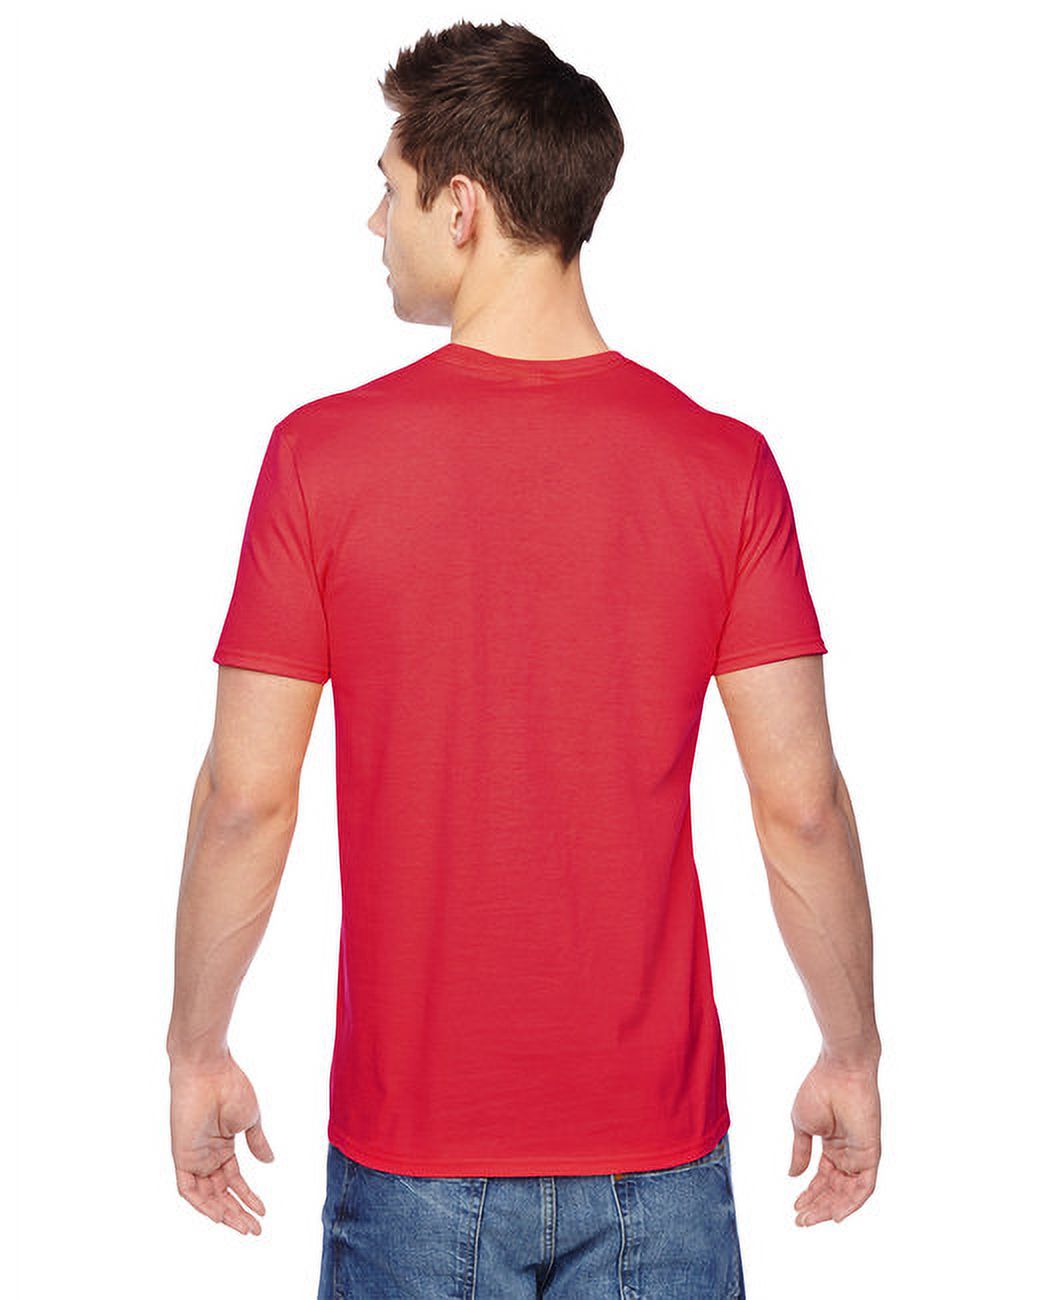 Fruit Of The Loom 100 Sofspun Cotton T-Shirt - image 2 of 4